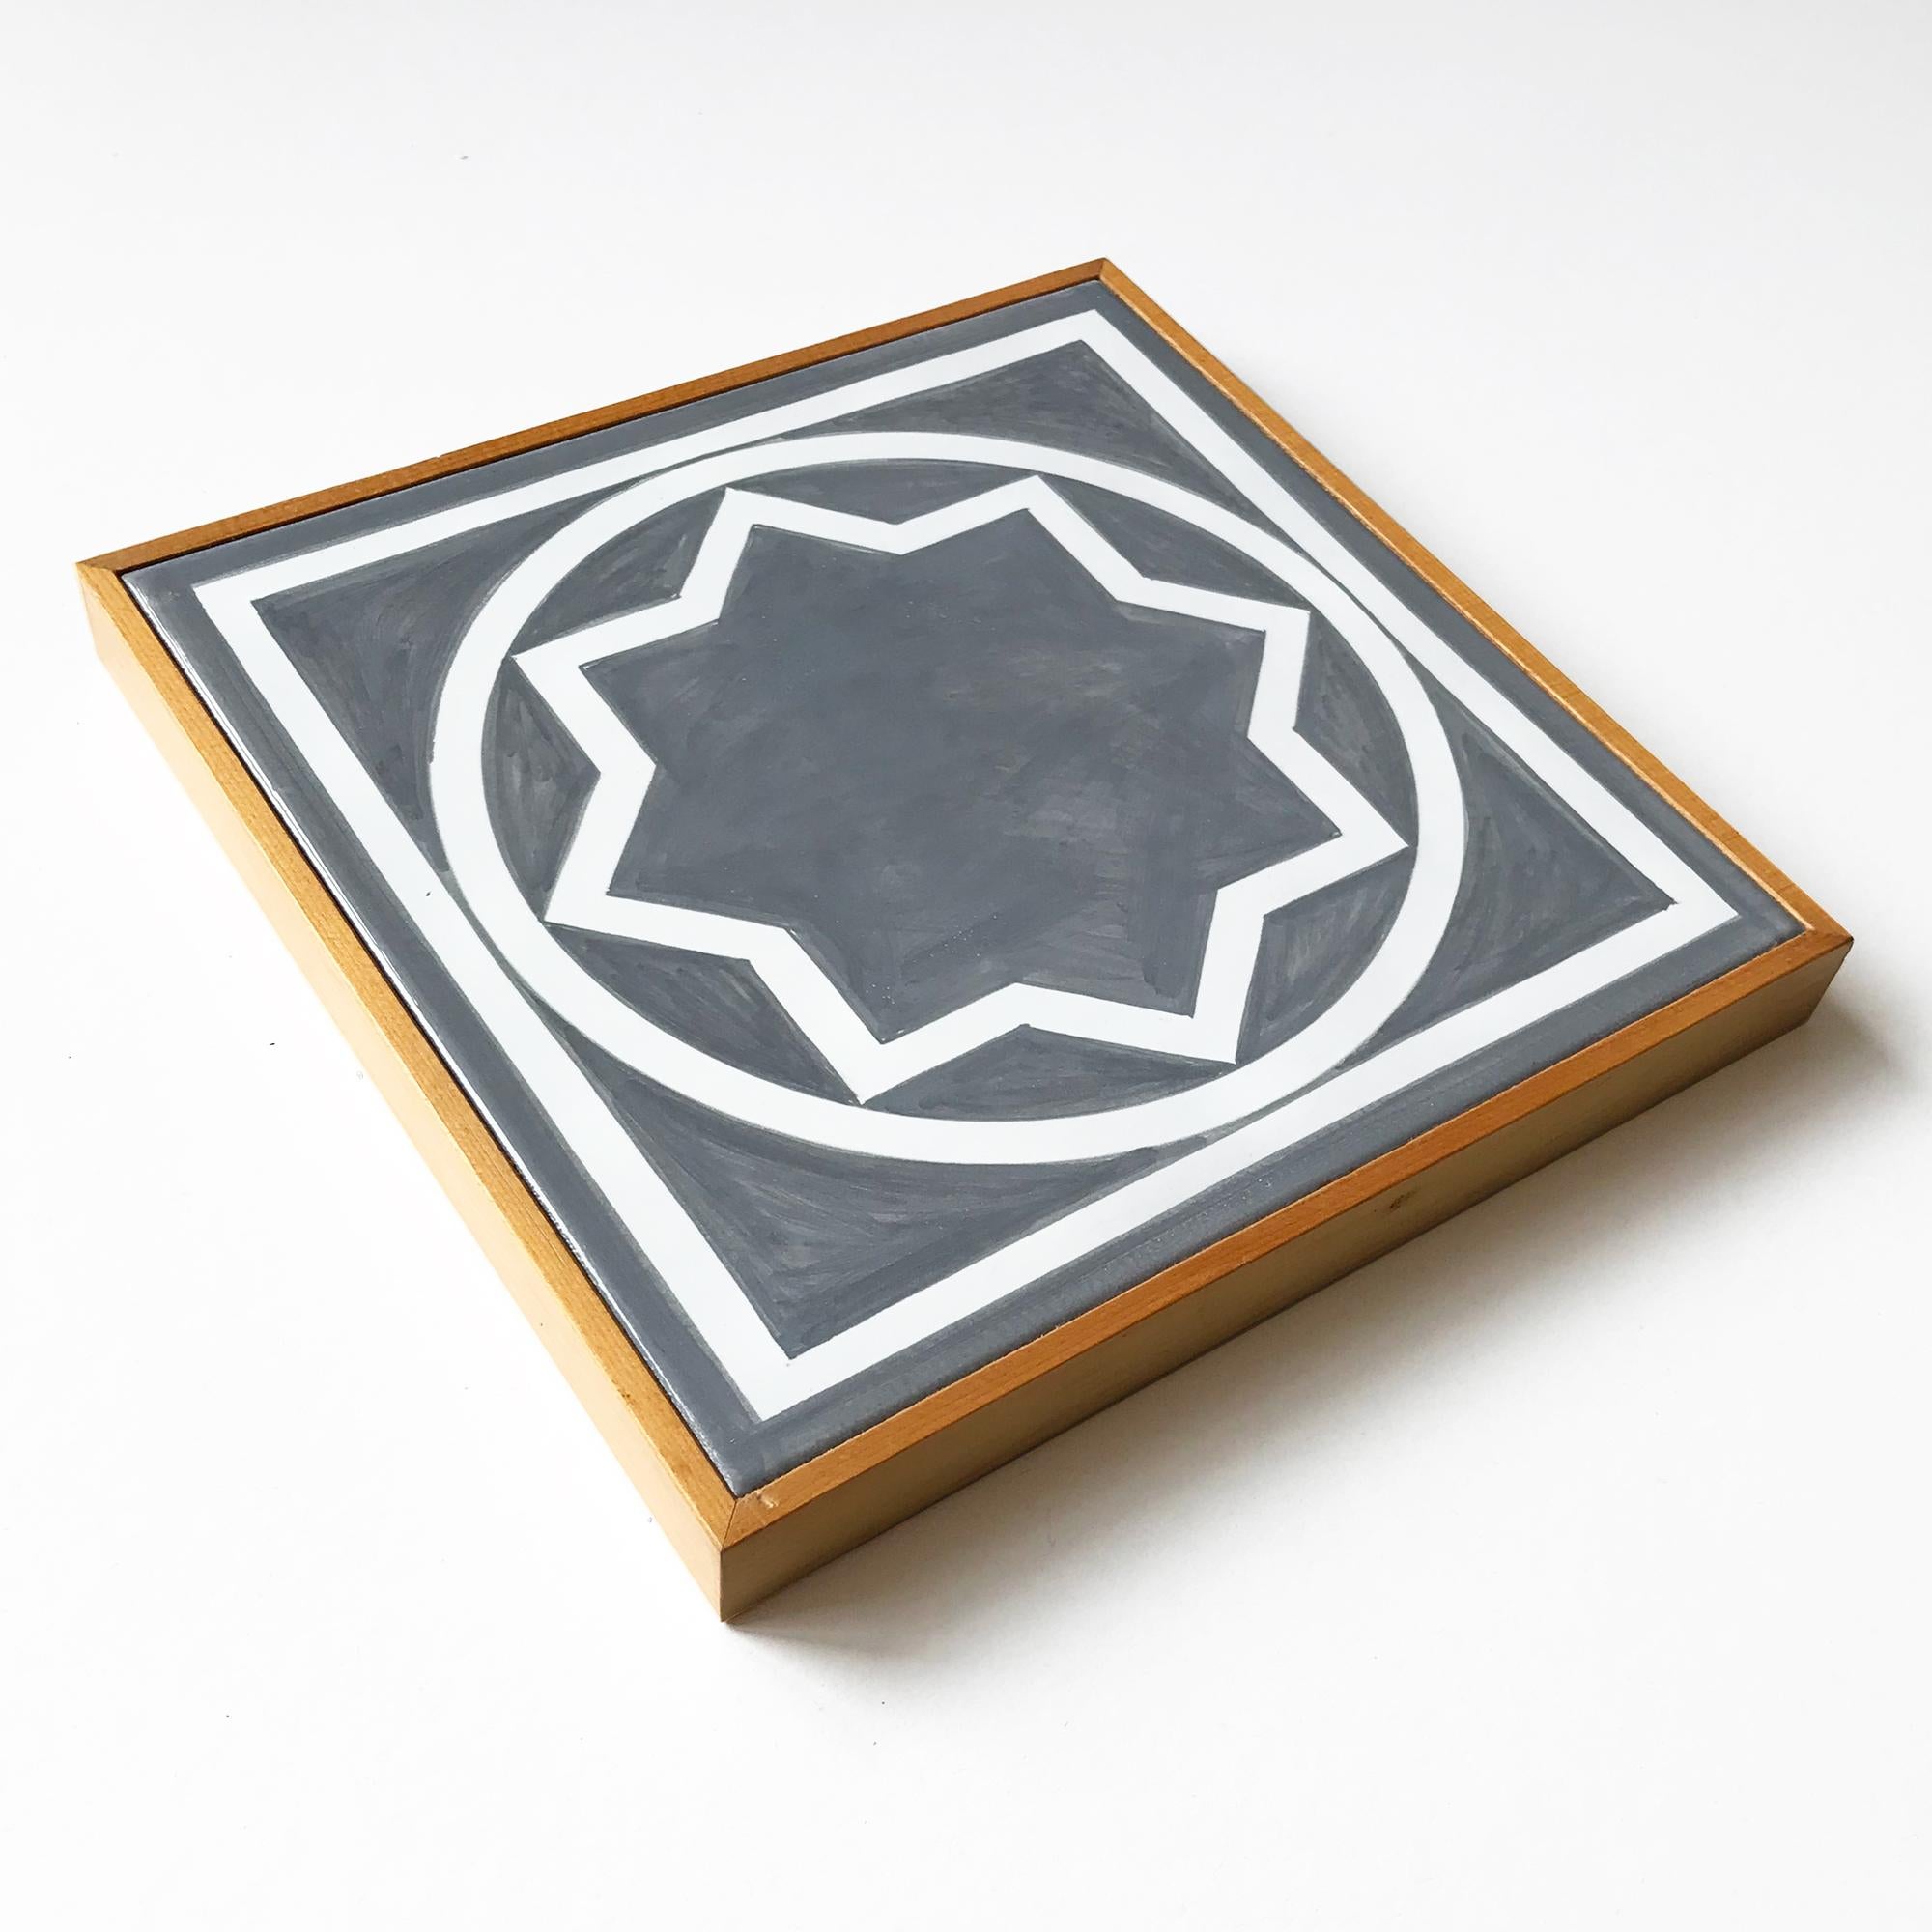 Untitled, Ceramic Wall Tile (Grey), Geometric Abstraction, Minimalism - Print by Sol LeWitt